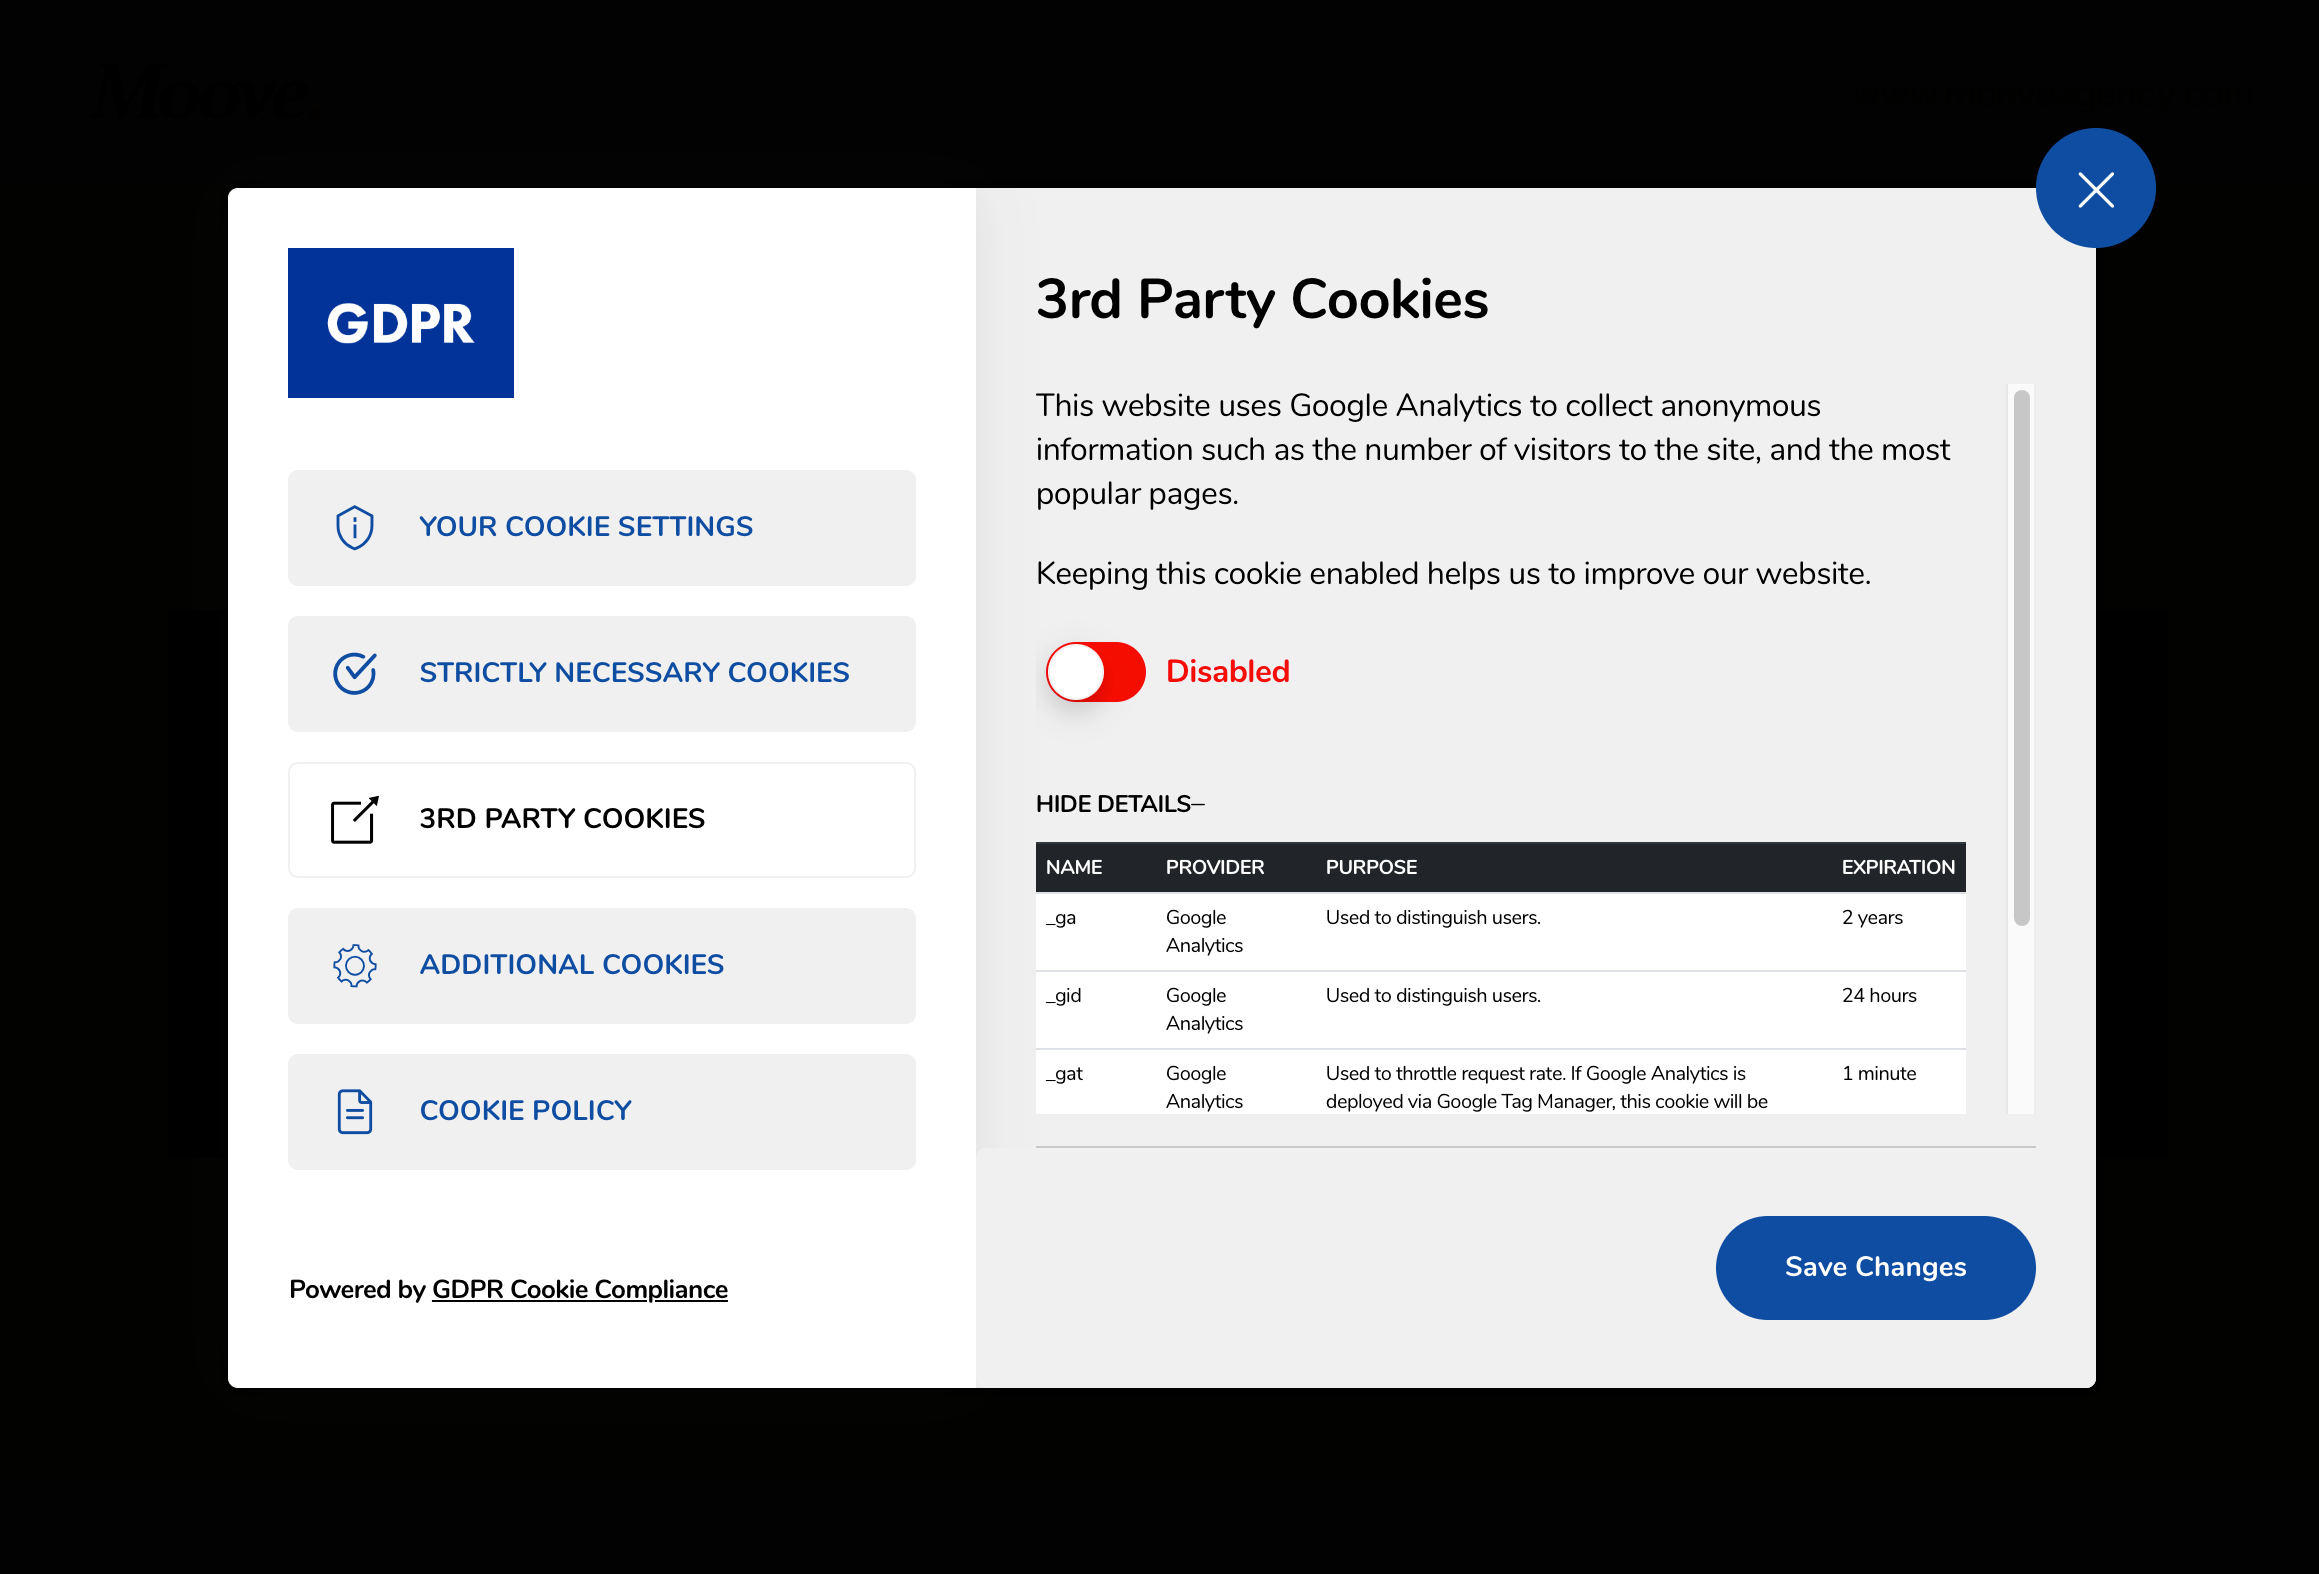 GDPR Cookie Compliance - Front-end - 3rd Party Cookies